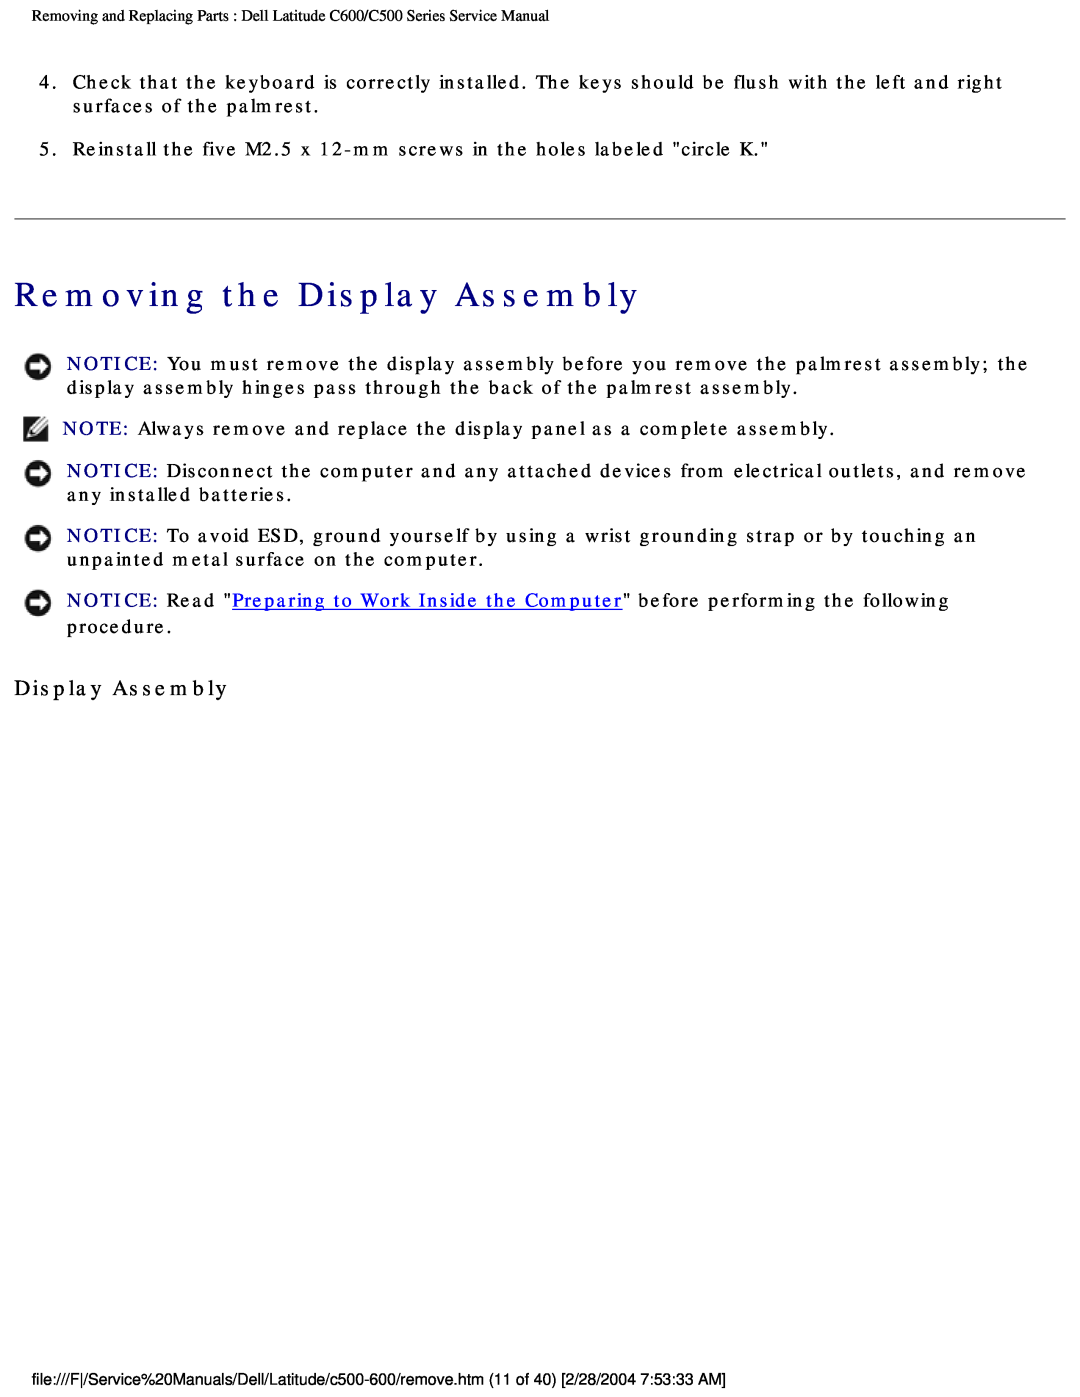 Dell C500 manual Removing the Display Assembly 